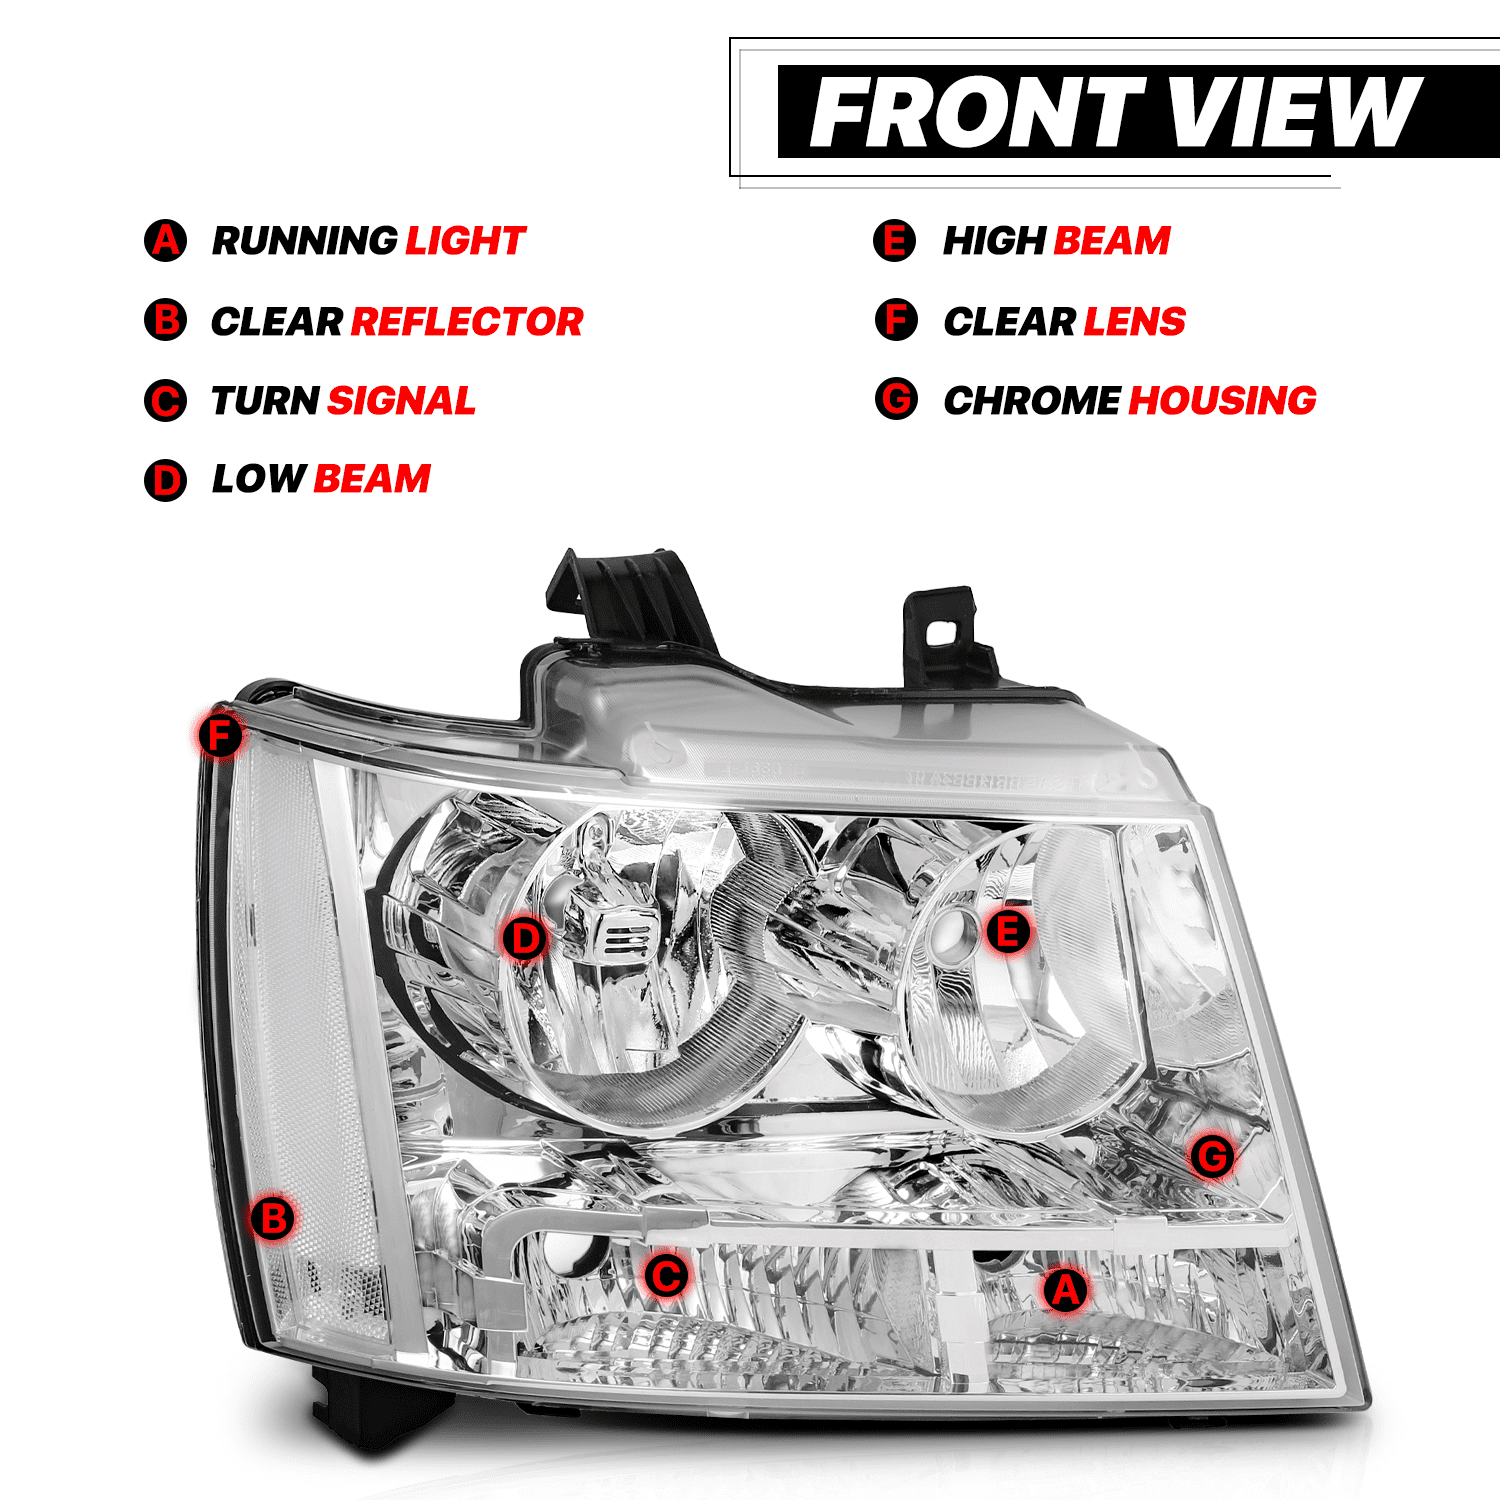 M-AUTO Headlights Assembly 07-14 Chevy Tahoe Suburban 1500 / 07-13 Avalanche  Suburban 2500 Truck, Chrome Housing Clear Lens Clear Corner 